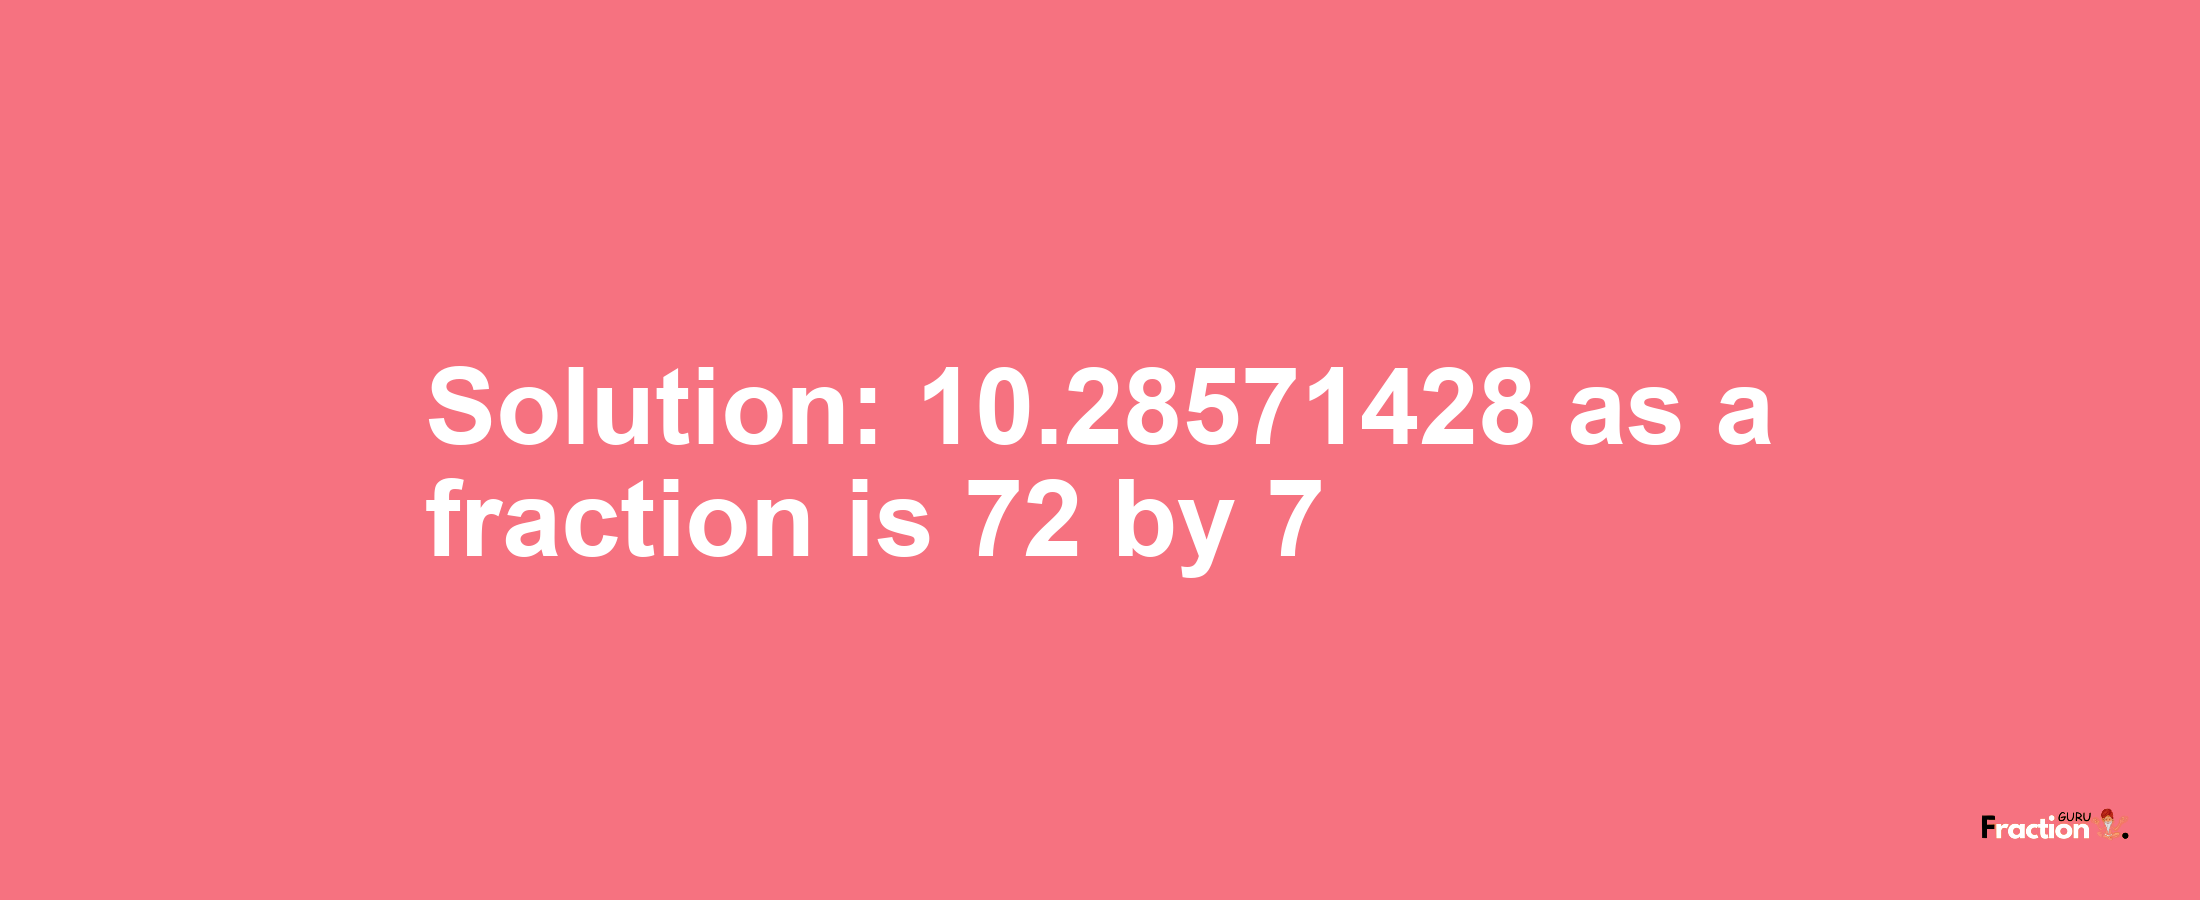 Solution:10.28571428 as a fraction is 72/7